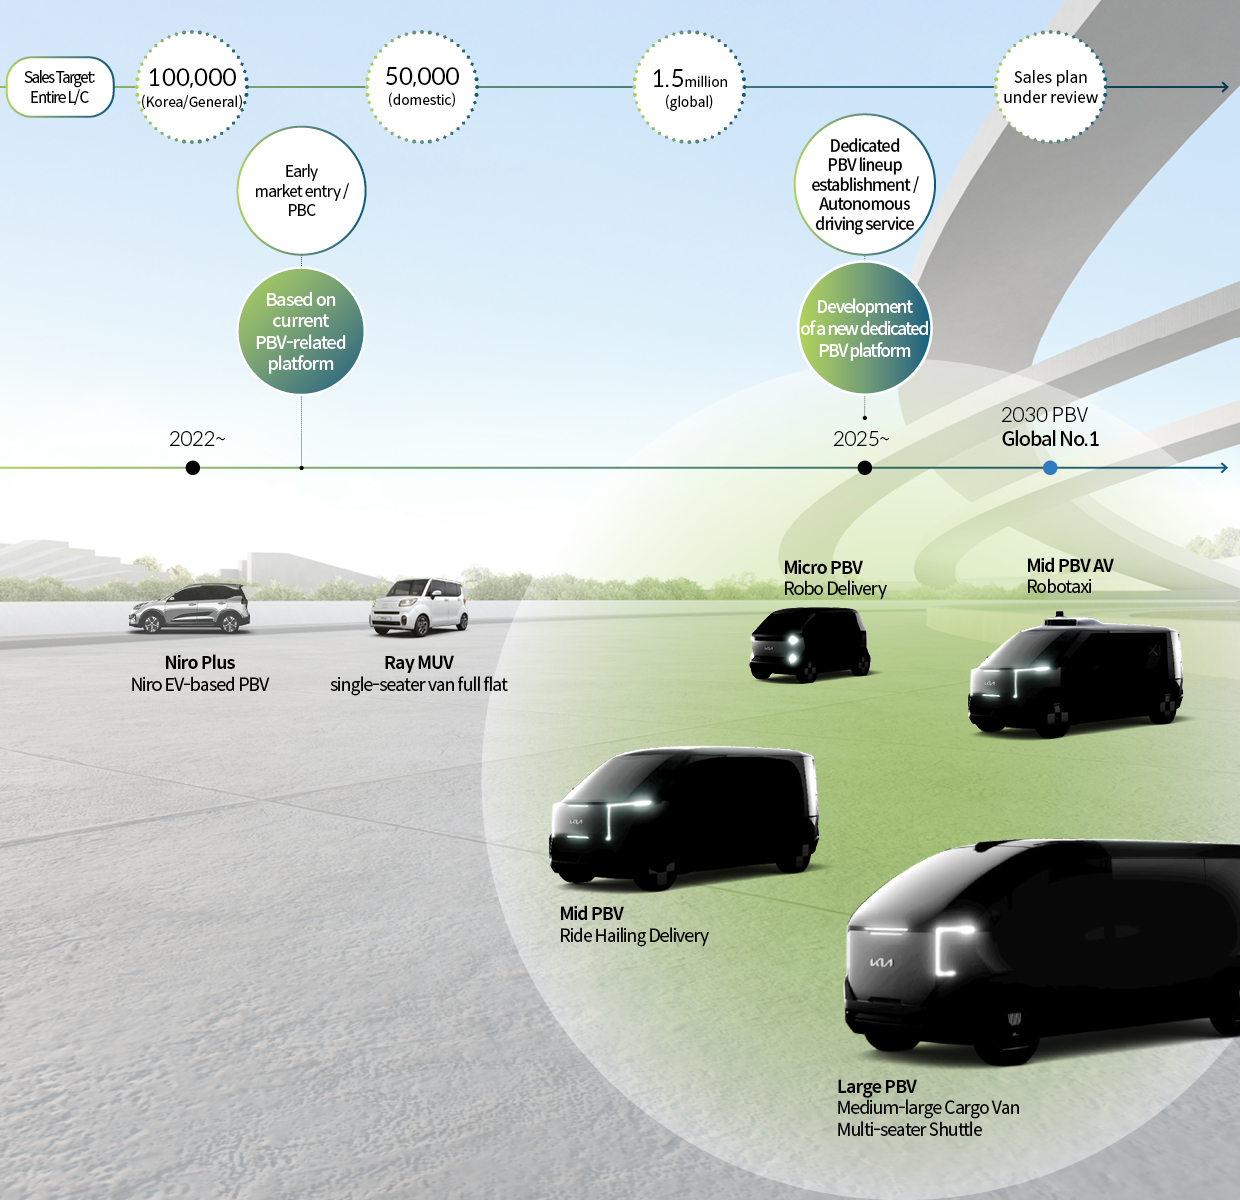 Infographics explaining the direction of Kia's PBV strategy and product lineup development